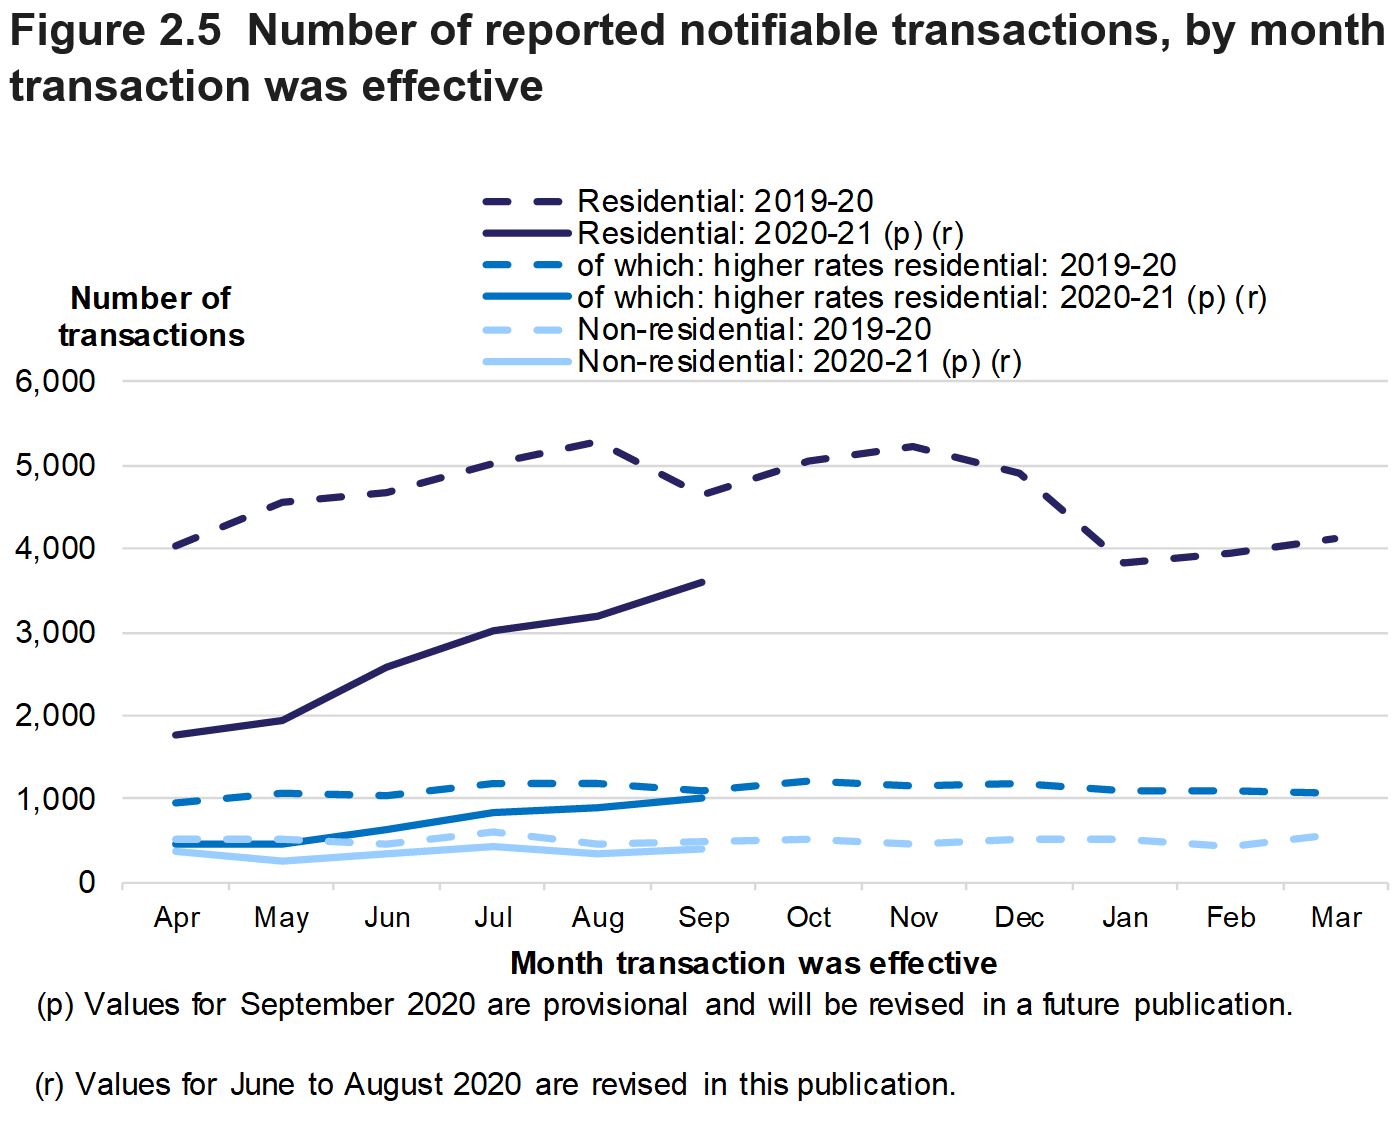 Figure 2.5 shows the monthly numbers of reported notifiable transactions from April 2019 to September 2020, for residential and non-residential transactions.